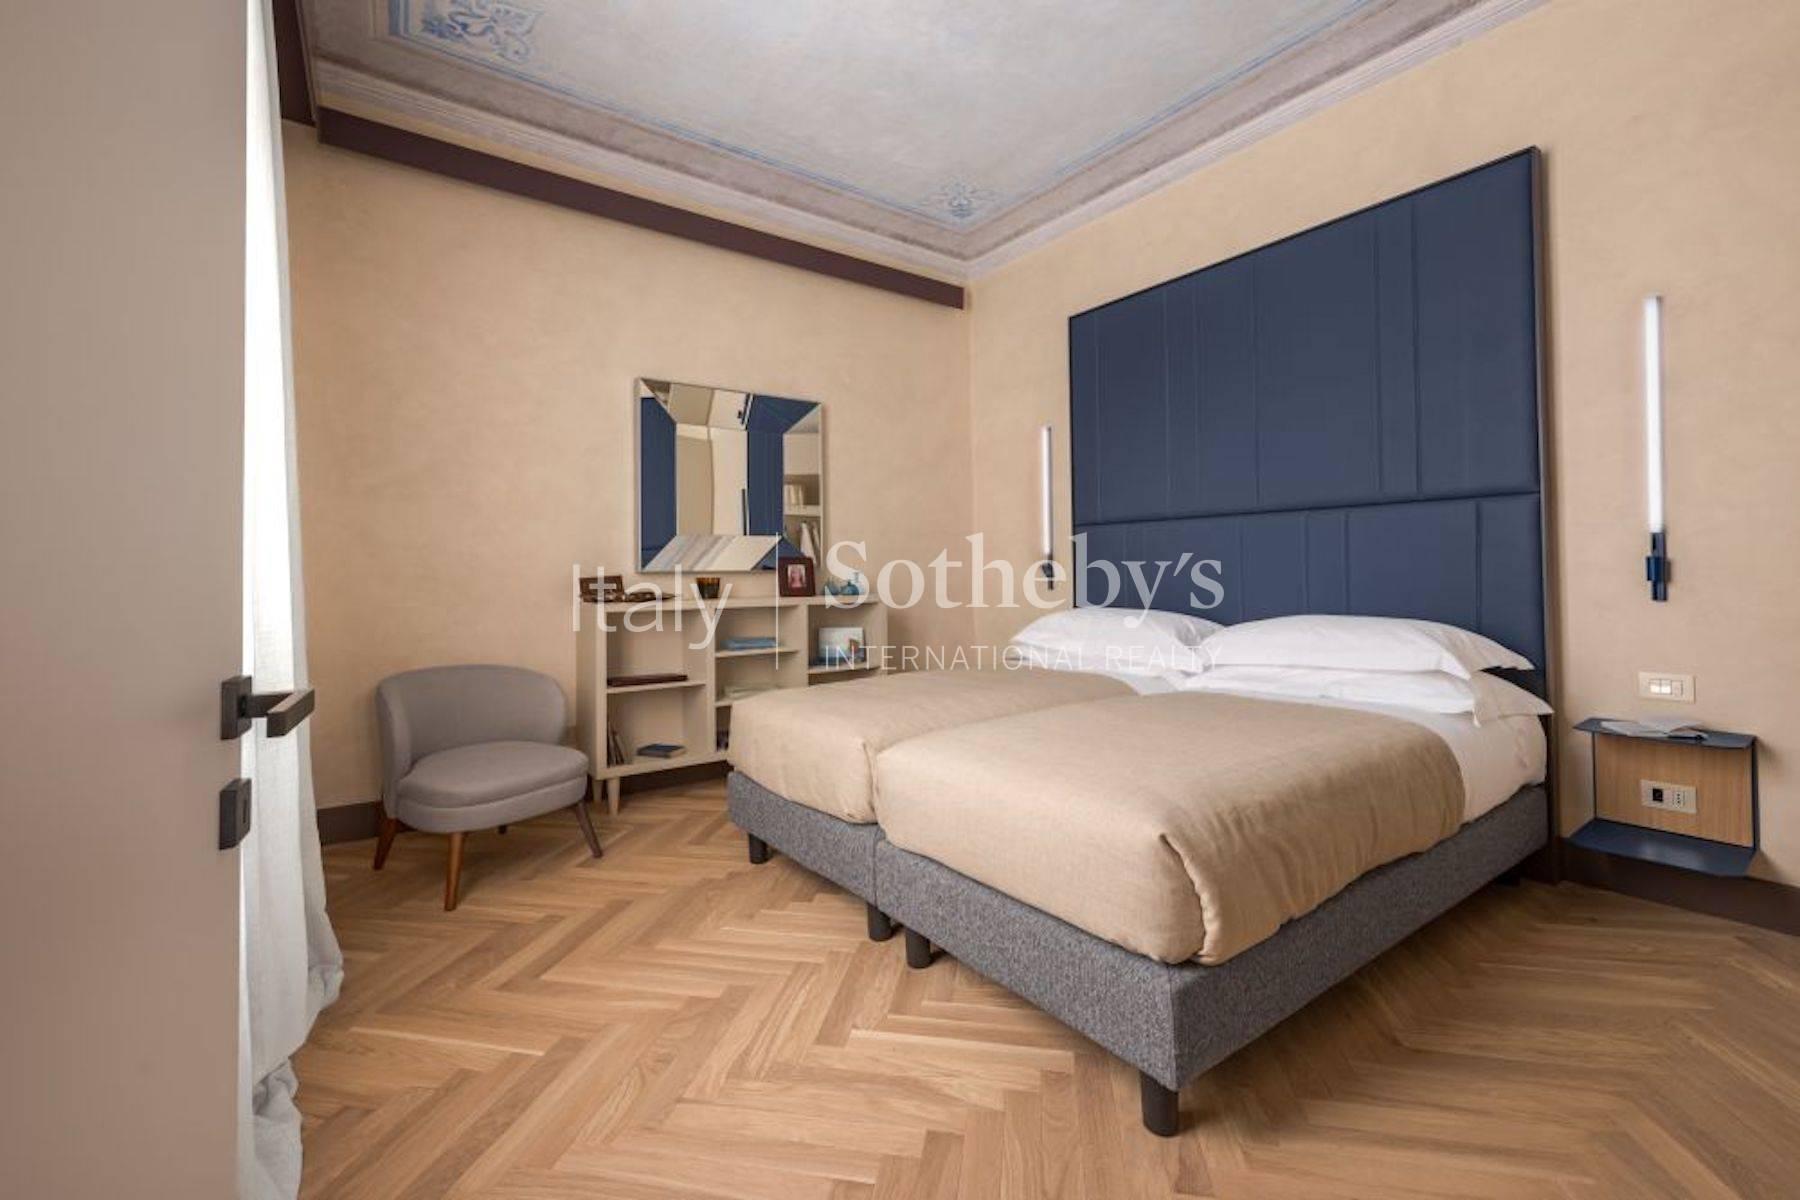 Mona Lisa apartment with courtyard in the heart of Florence - 8